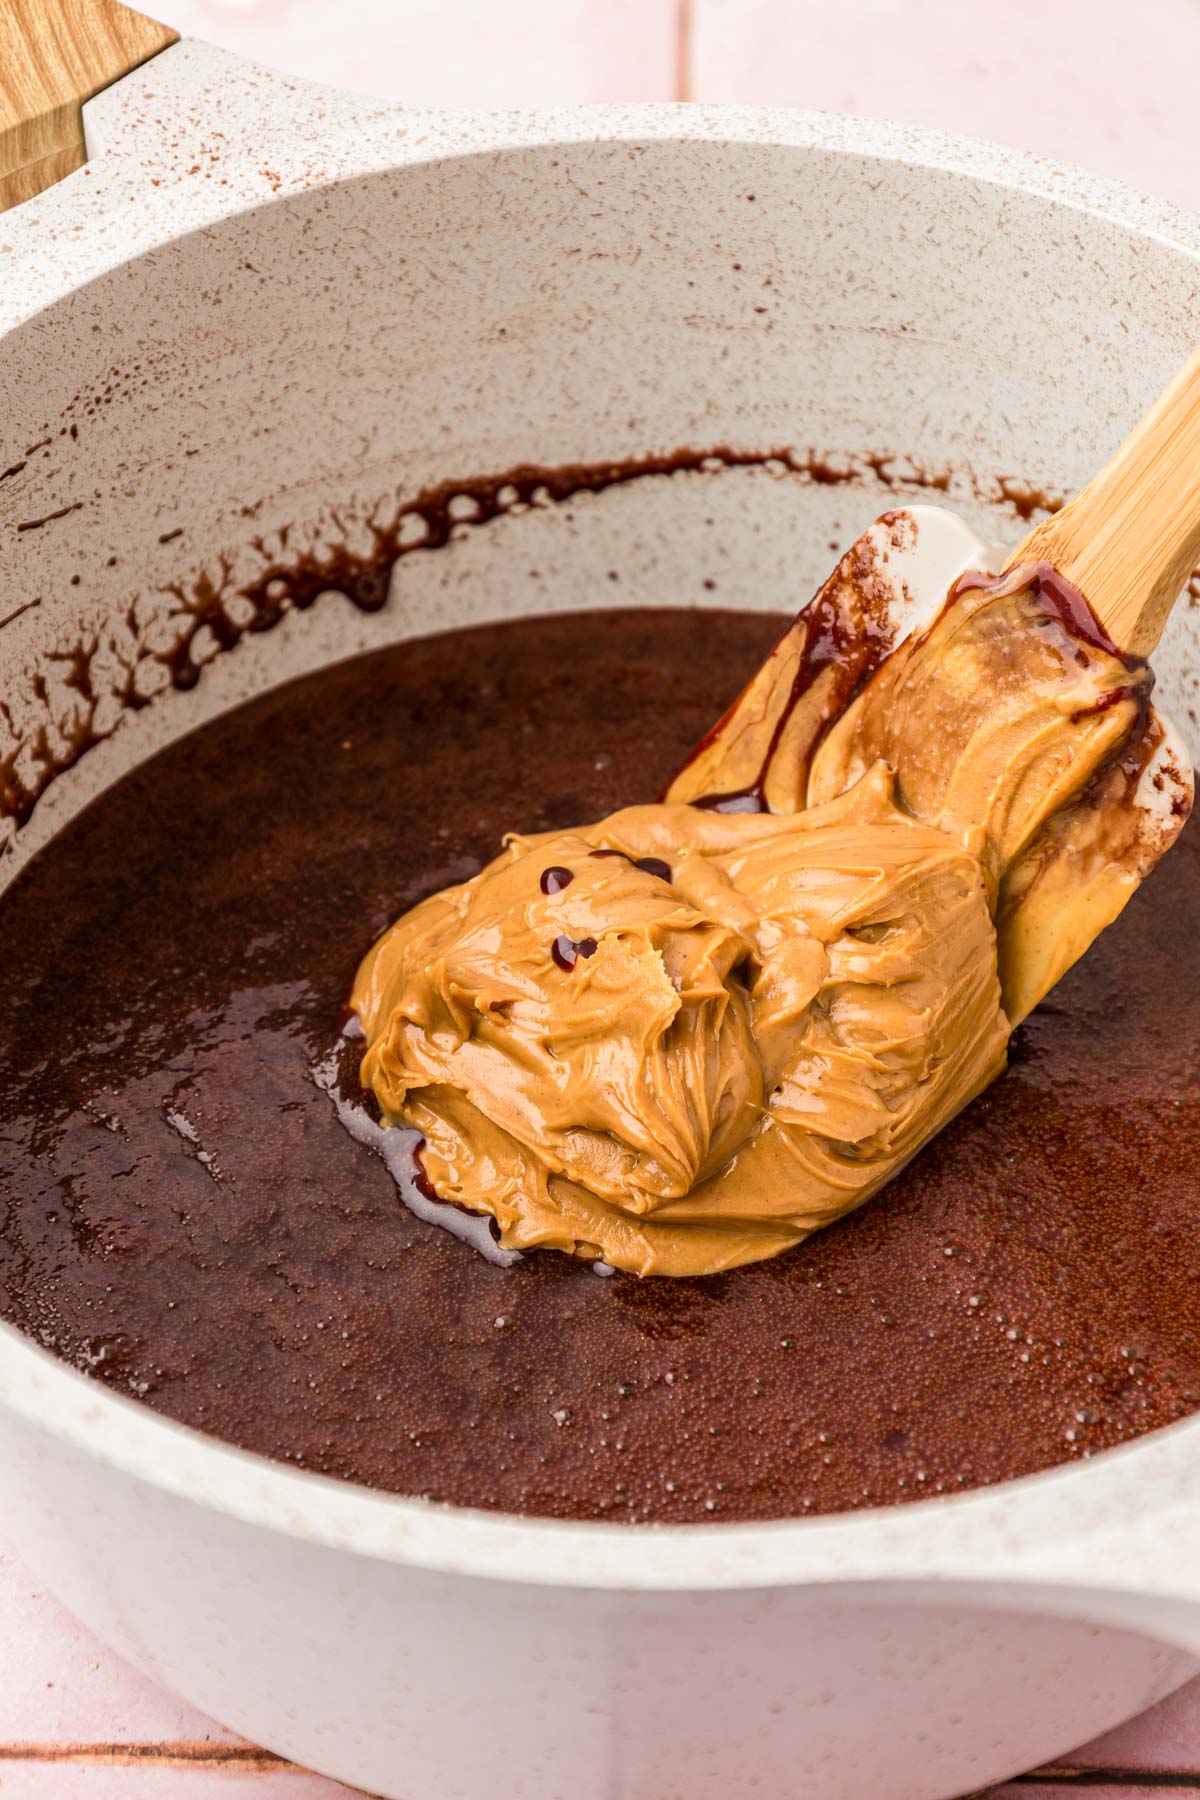 Peanut butter being added to a chocolate sugar mixture to make no bake cookies.